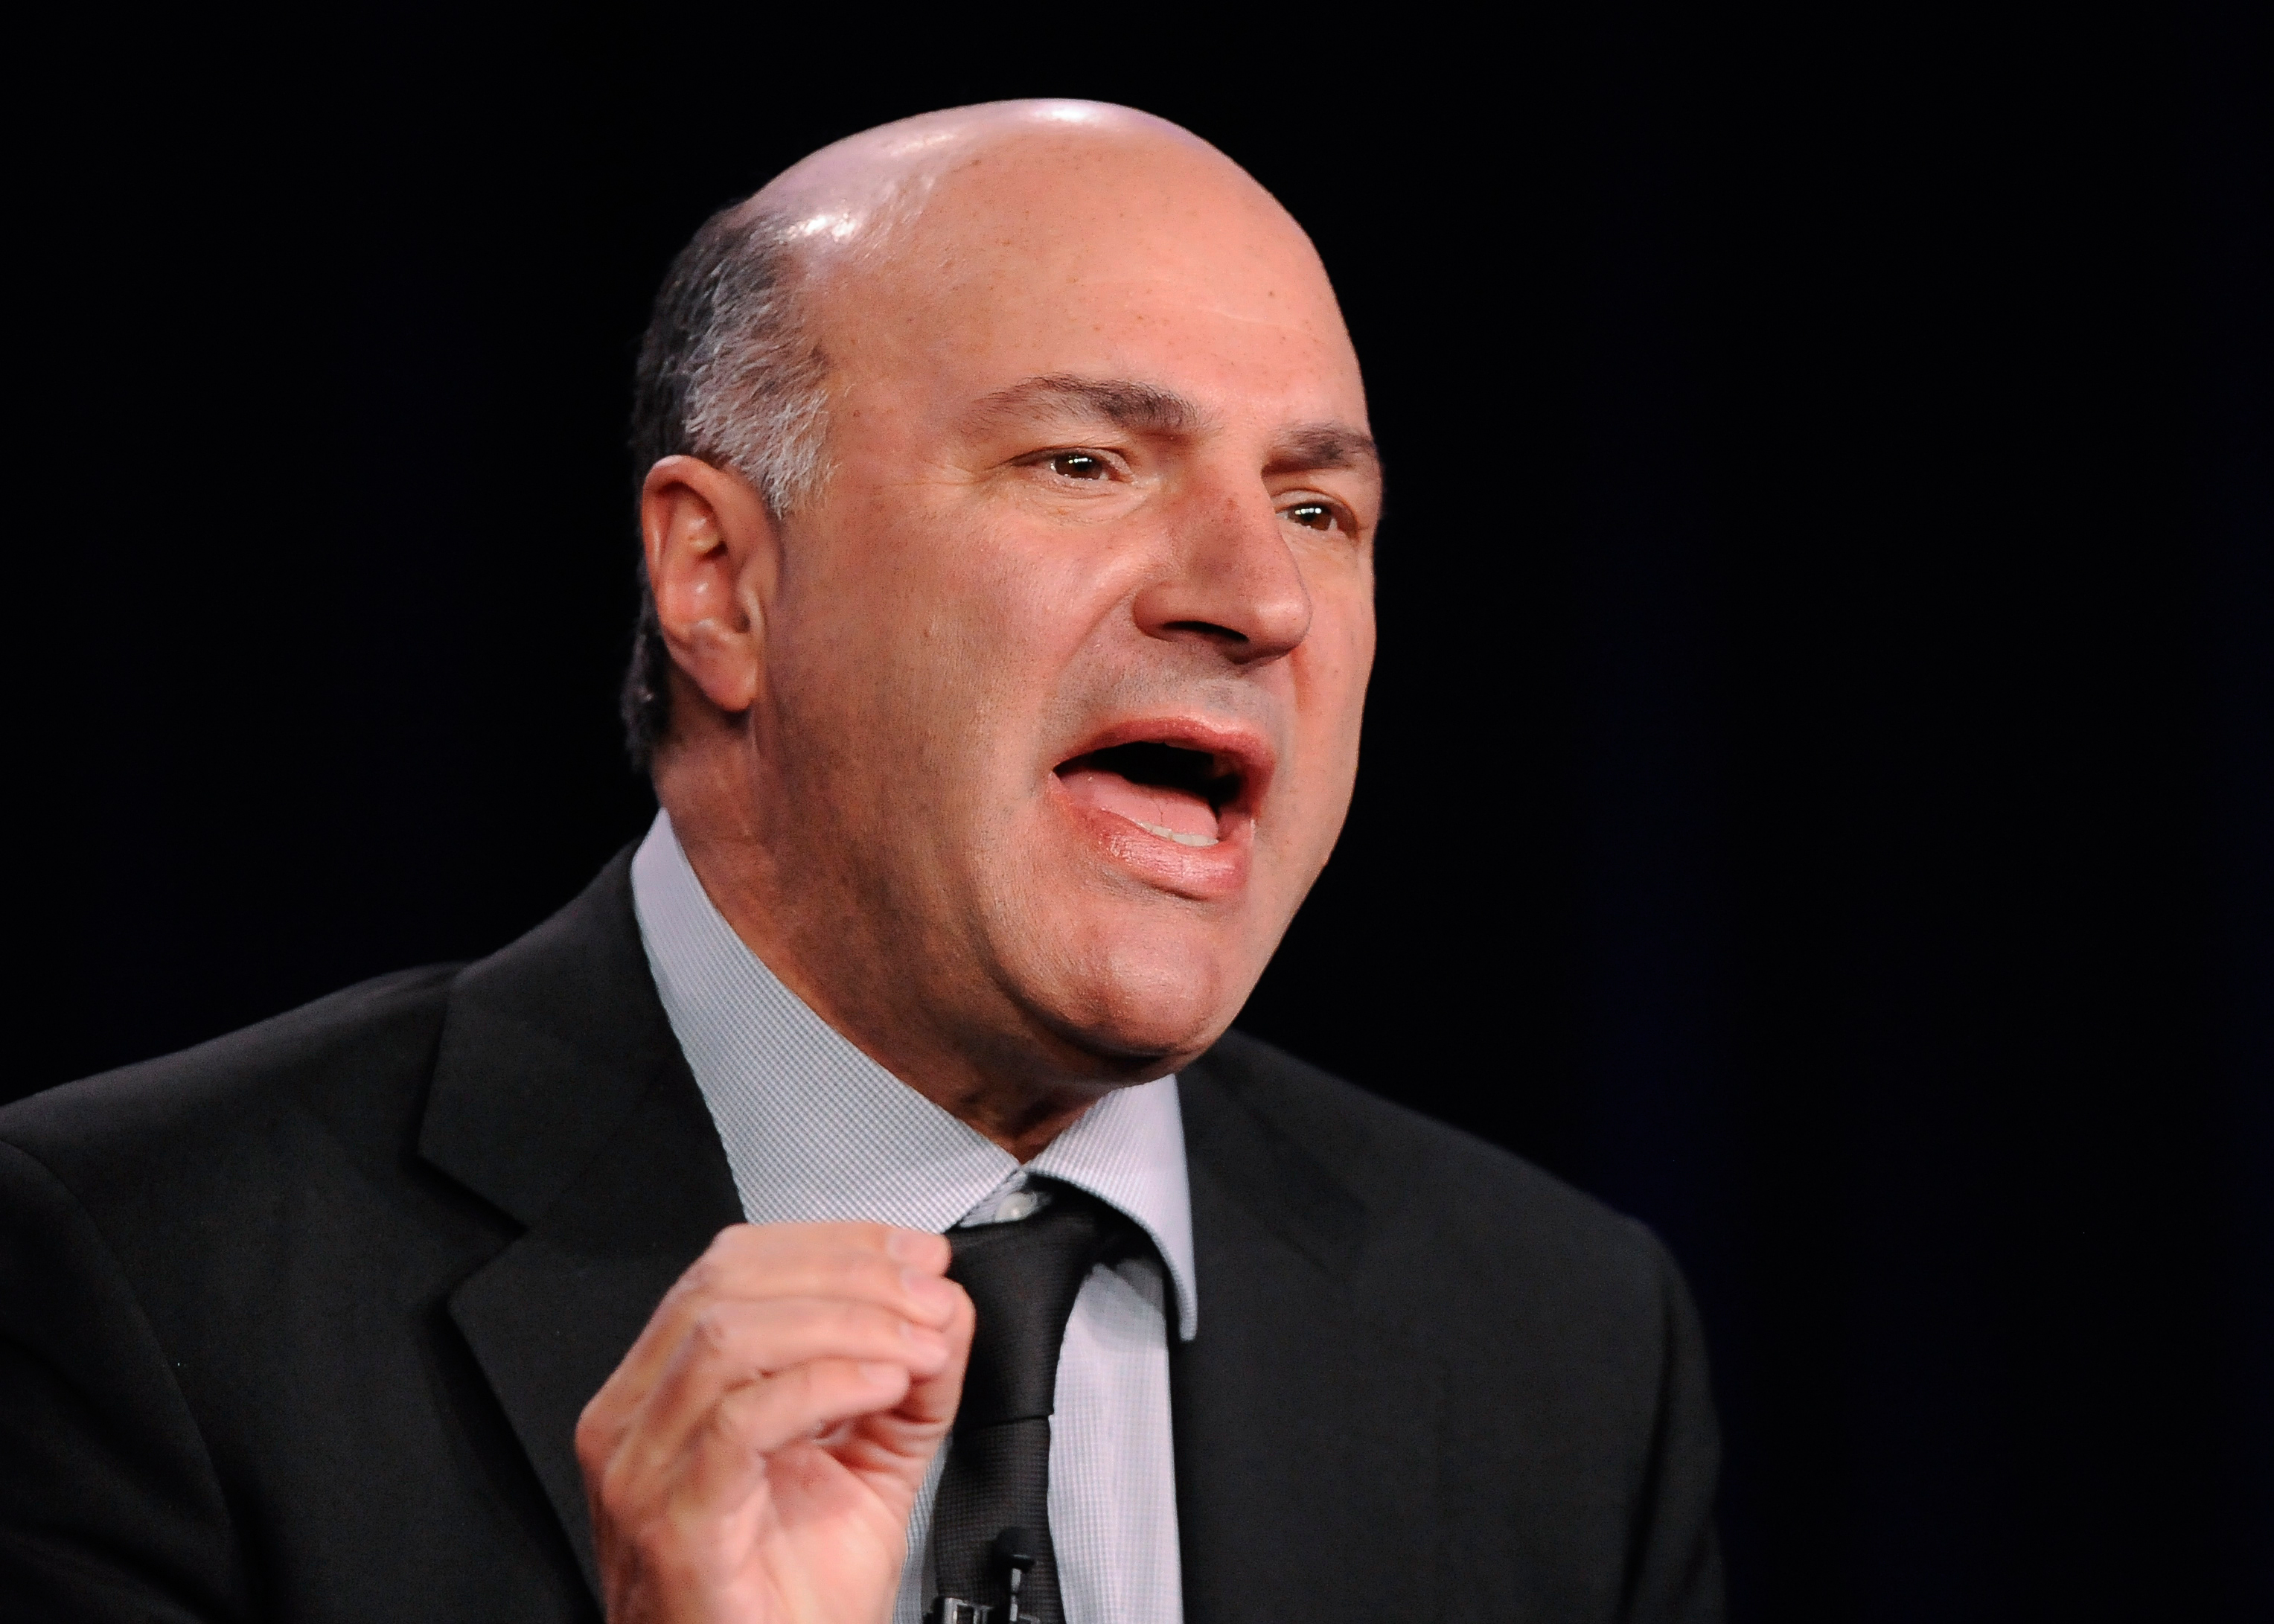 Television personality and businessman Kevin O'Leary